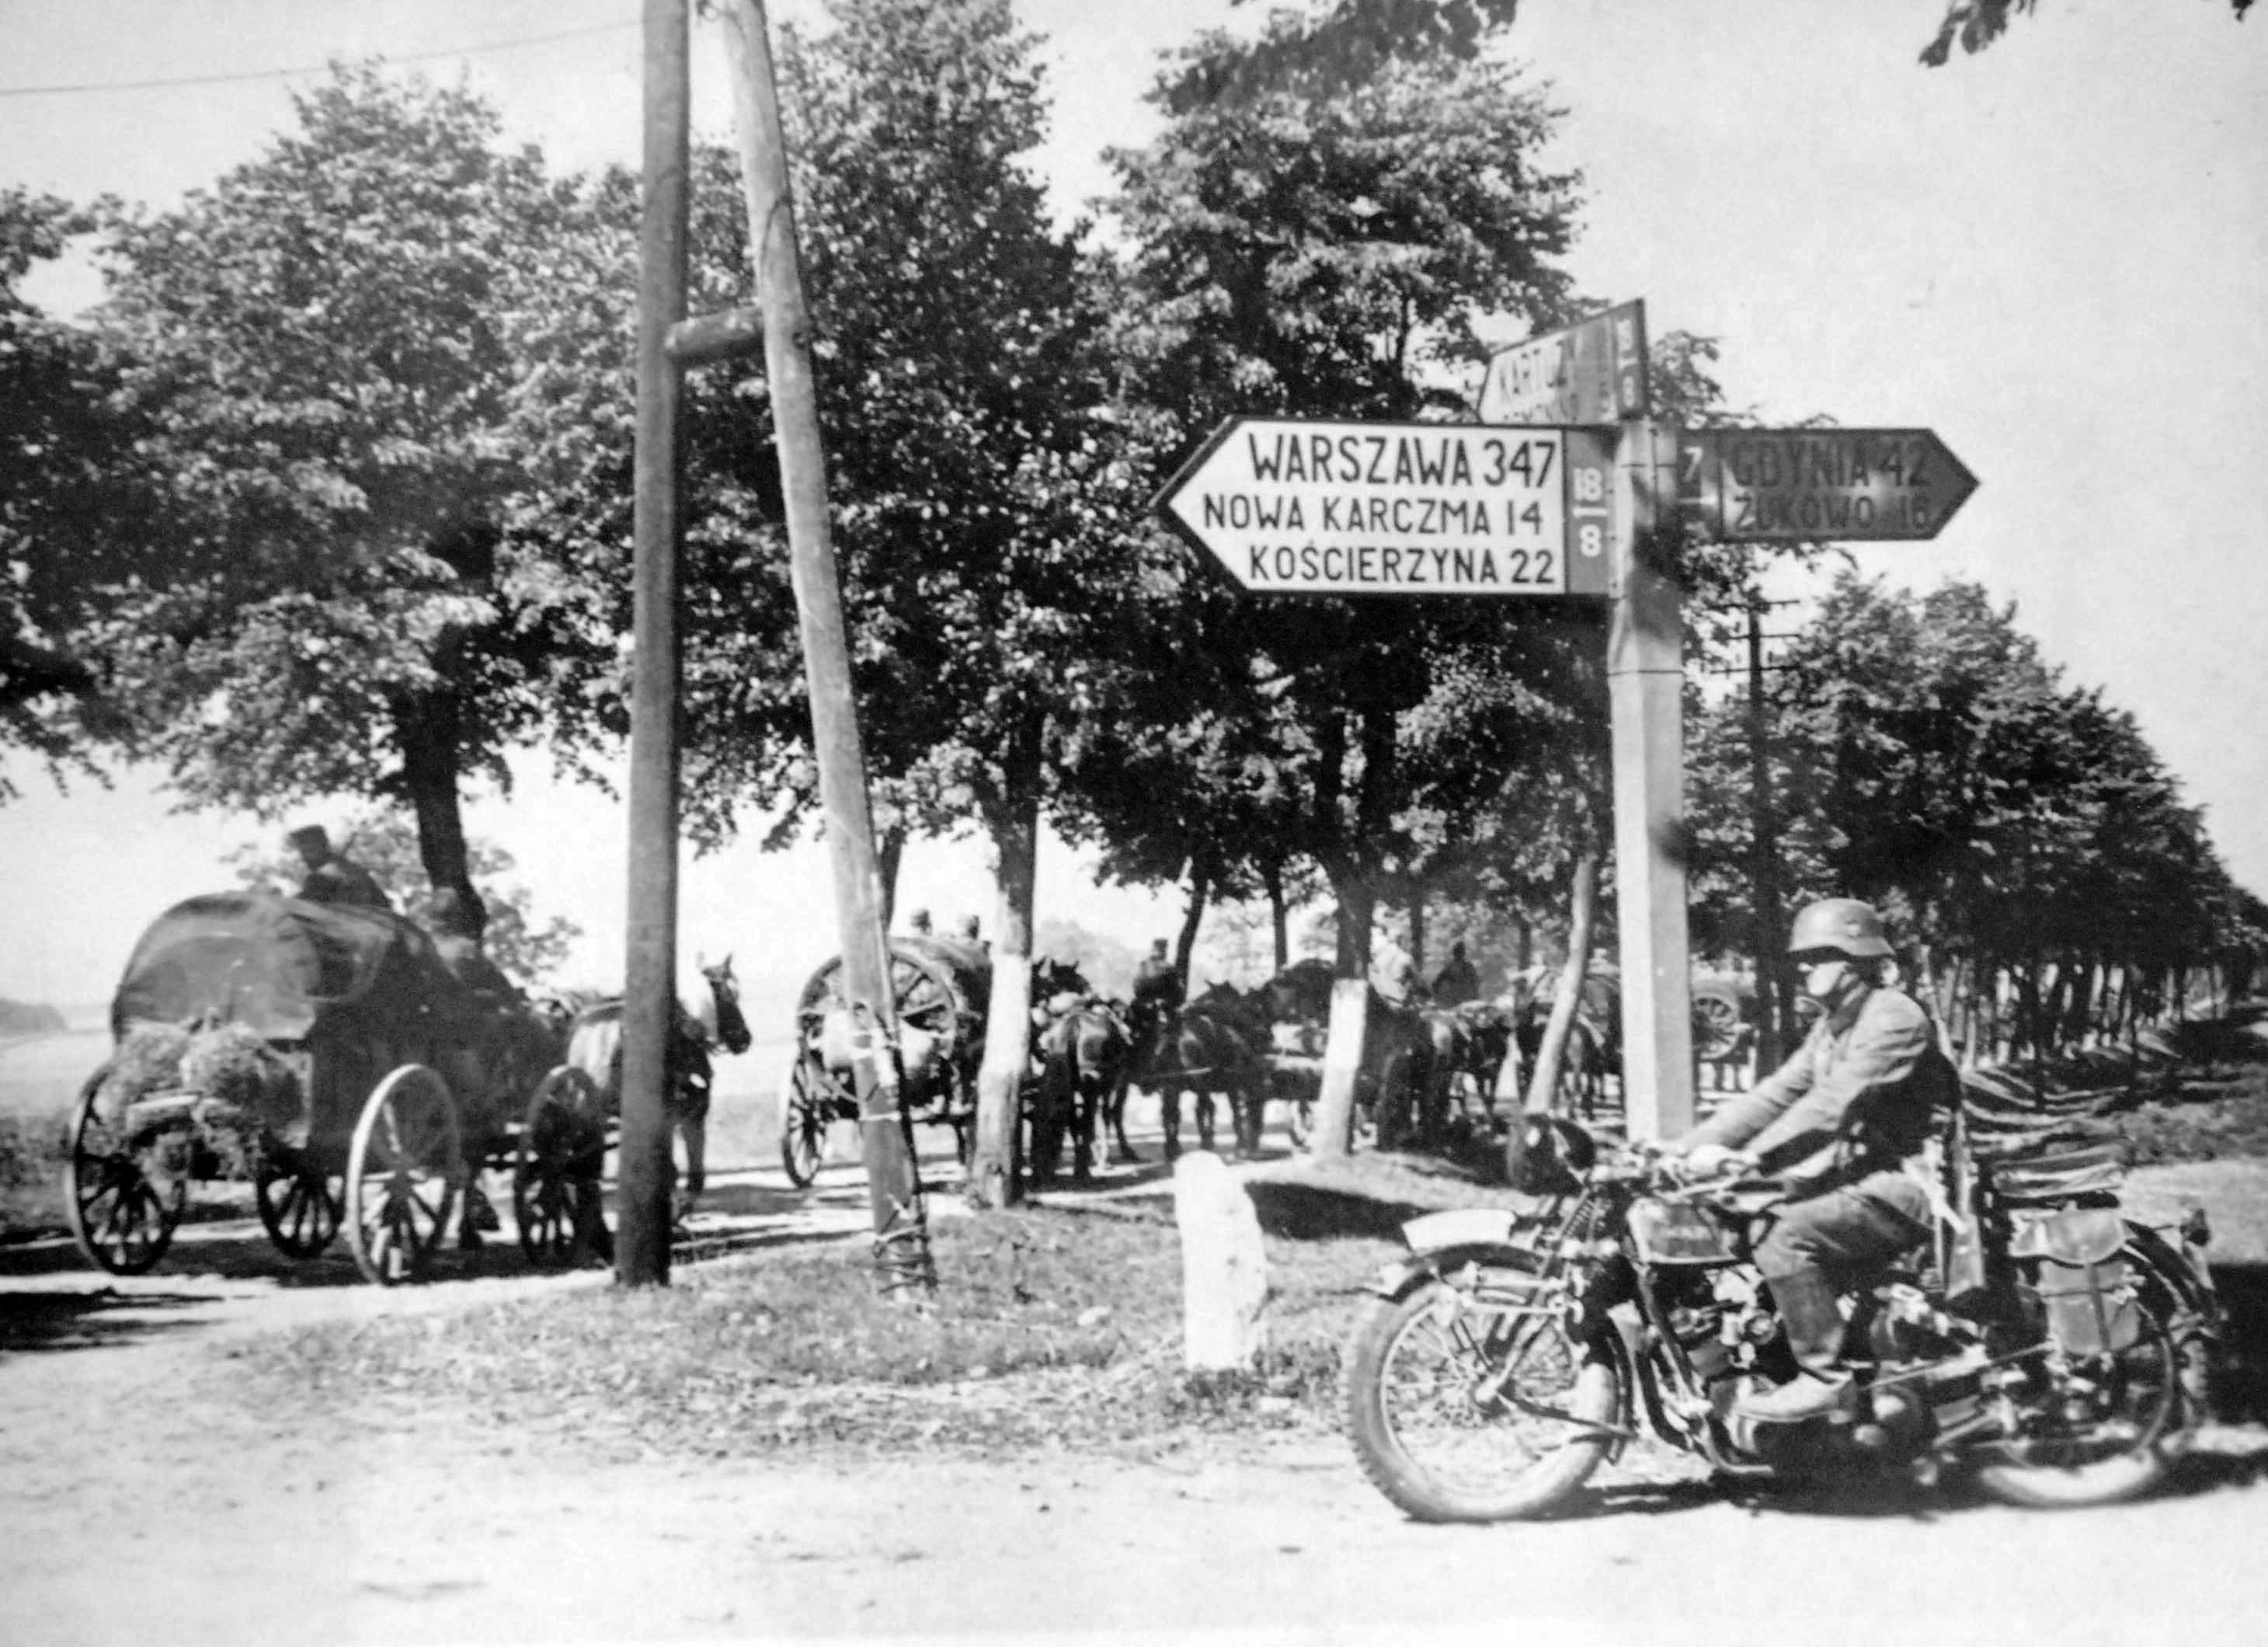 German troops at the Egiertowo crossroads on the road to Danzig during the initial invasion of Poland, 1 Sep 1939. Note the heavy German reliance on horse-drawn transports.